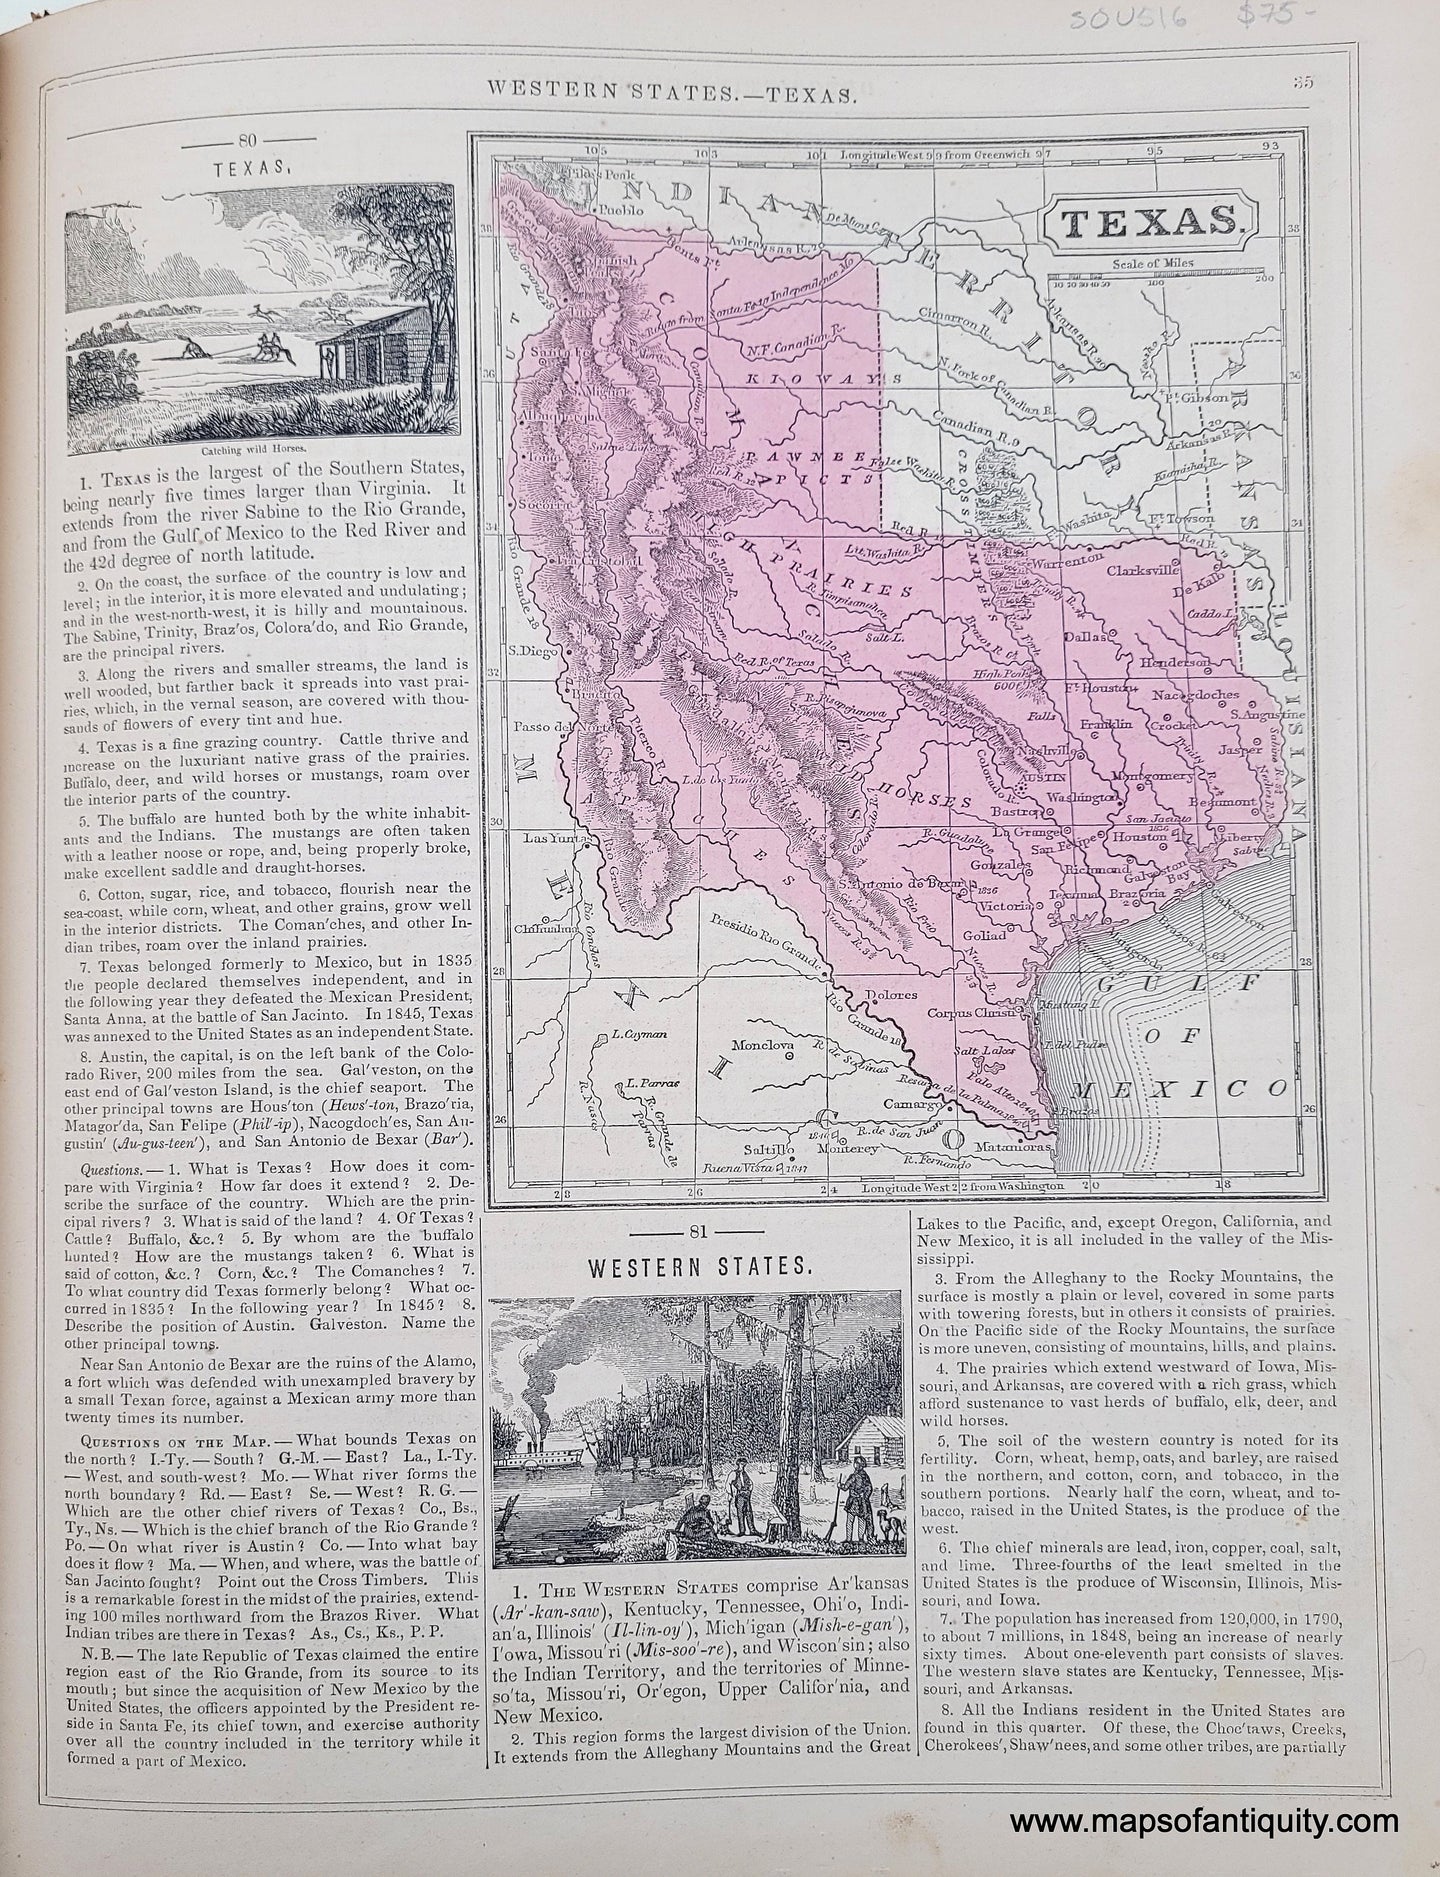 Genuine-Antique-Hand-Colored-Map-Double-sided-page-Texas-verso-Arkansas-1850-Mitchell-Thomas-Cowperthwait-Co--Maps-Of-Antiquity